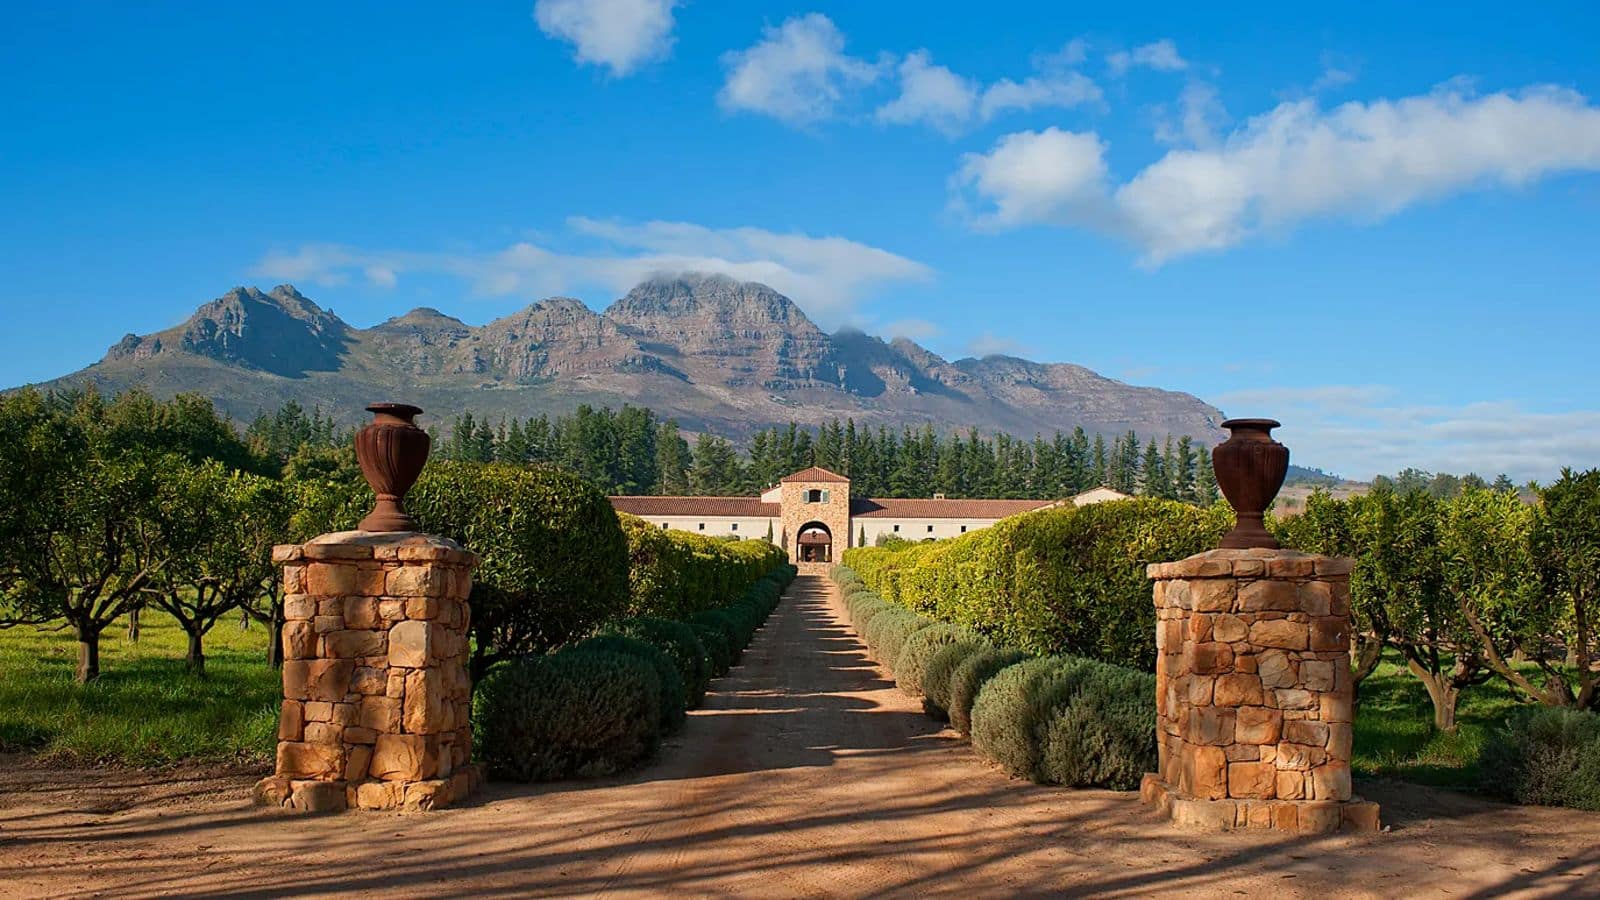 Head over to Cape Town's wine country escapes